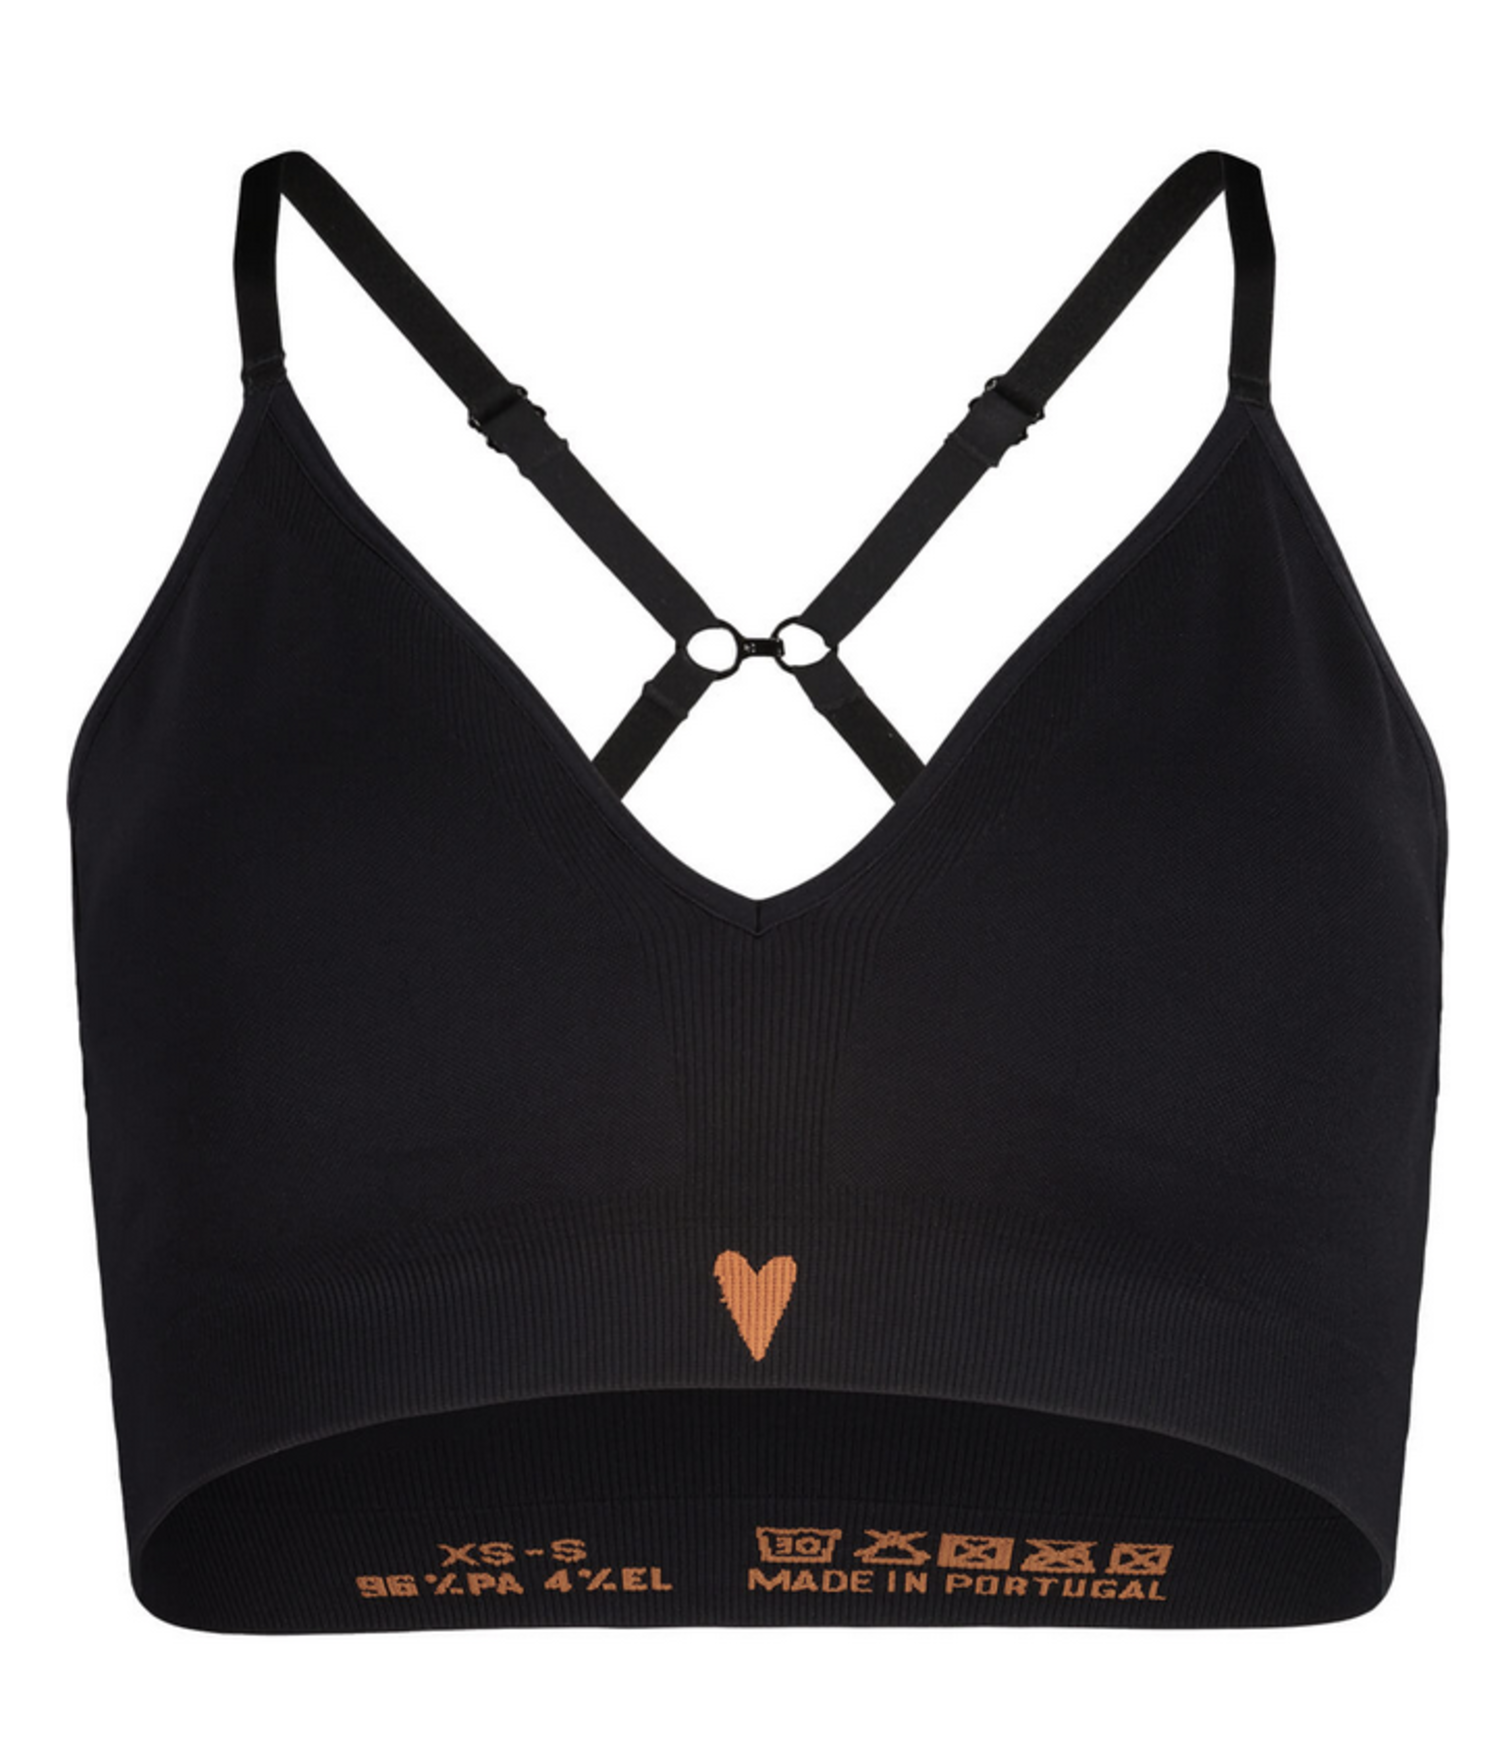 CindrelM. Sports Bra - Moonless - Twisted Tree